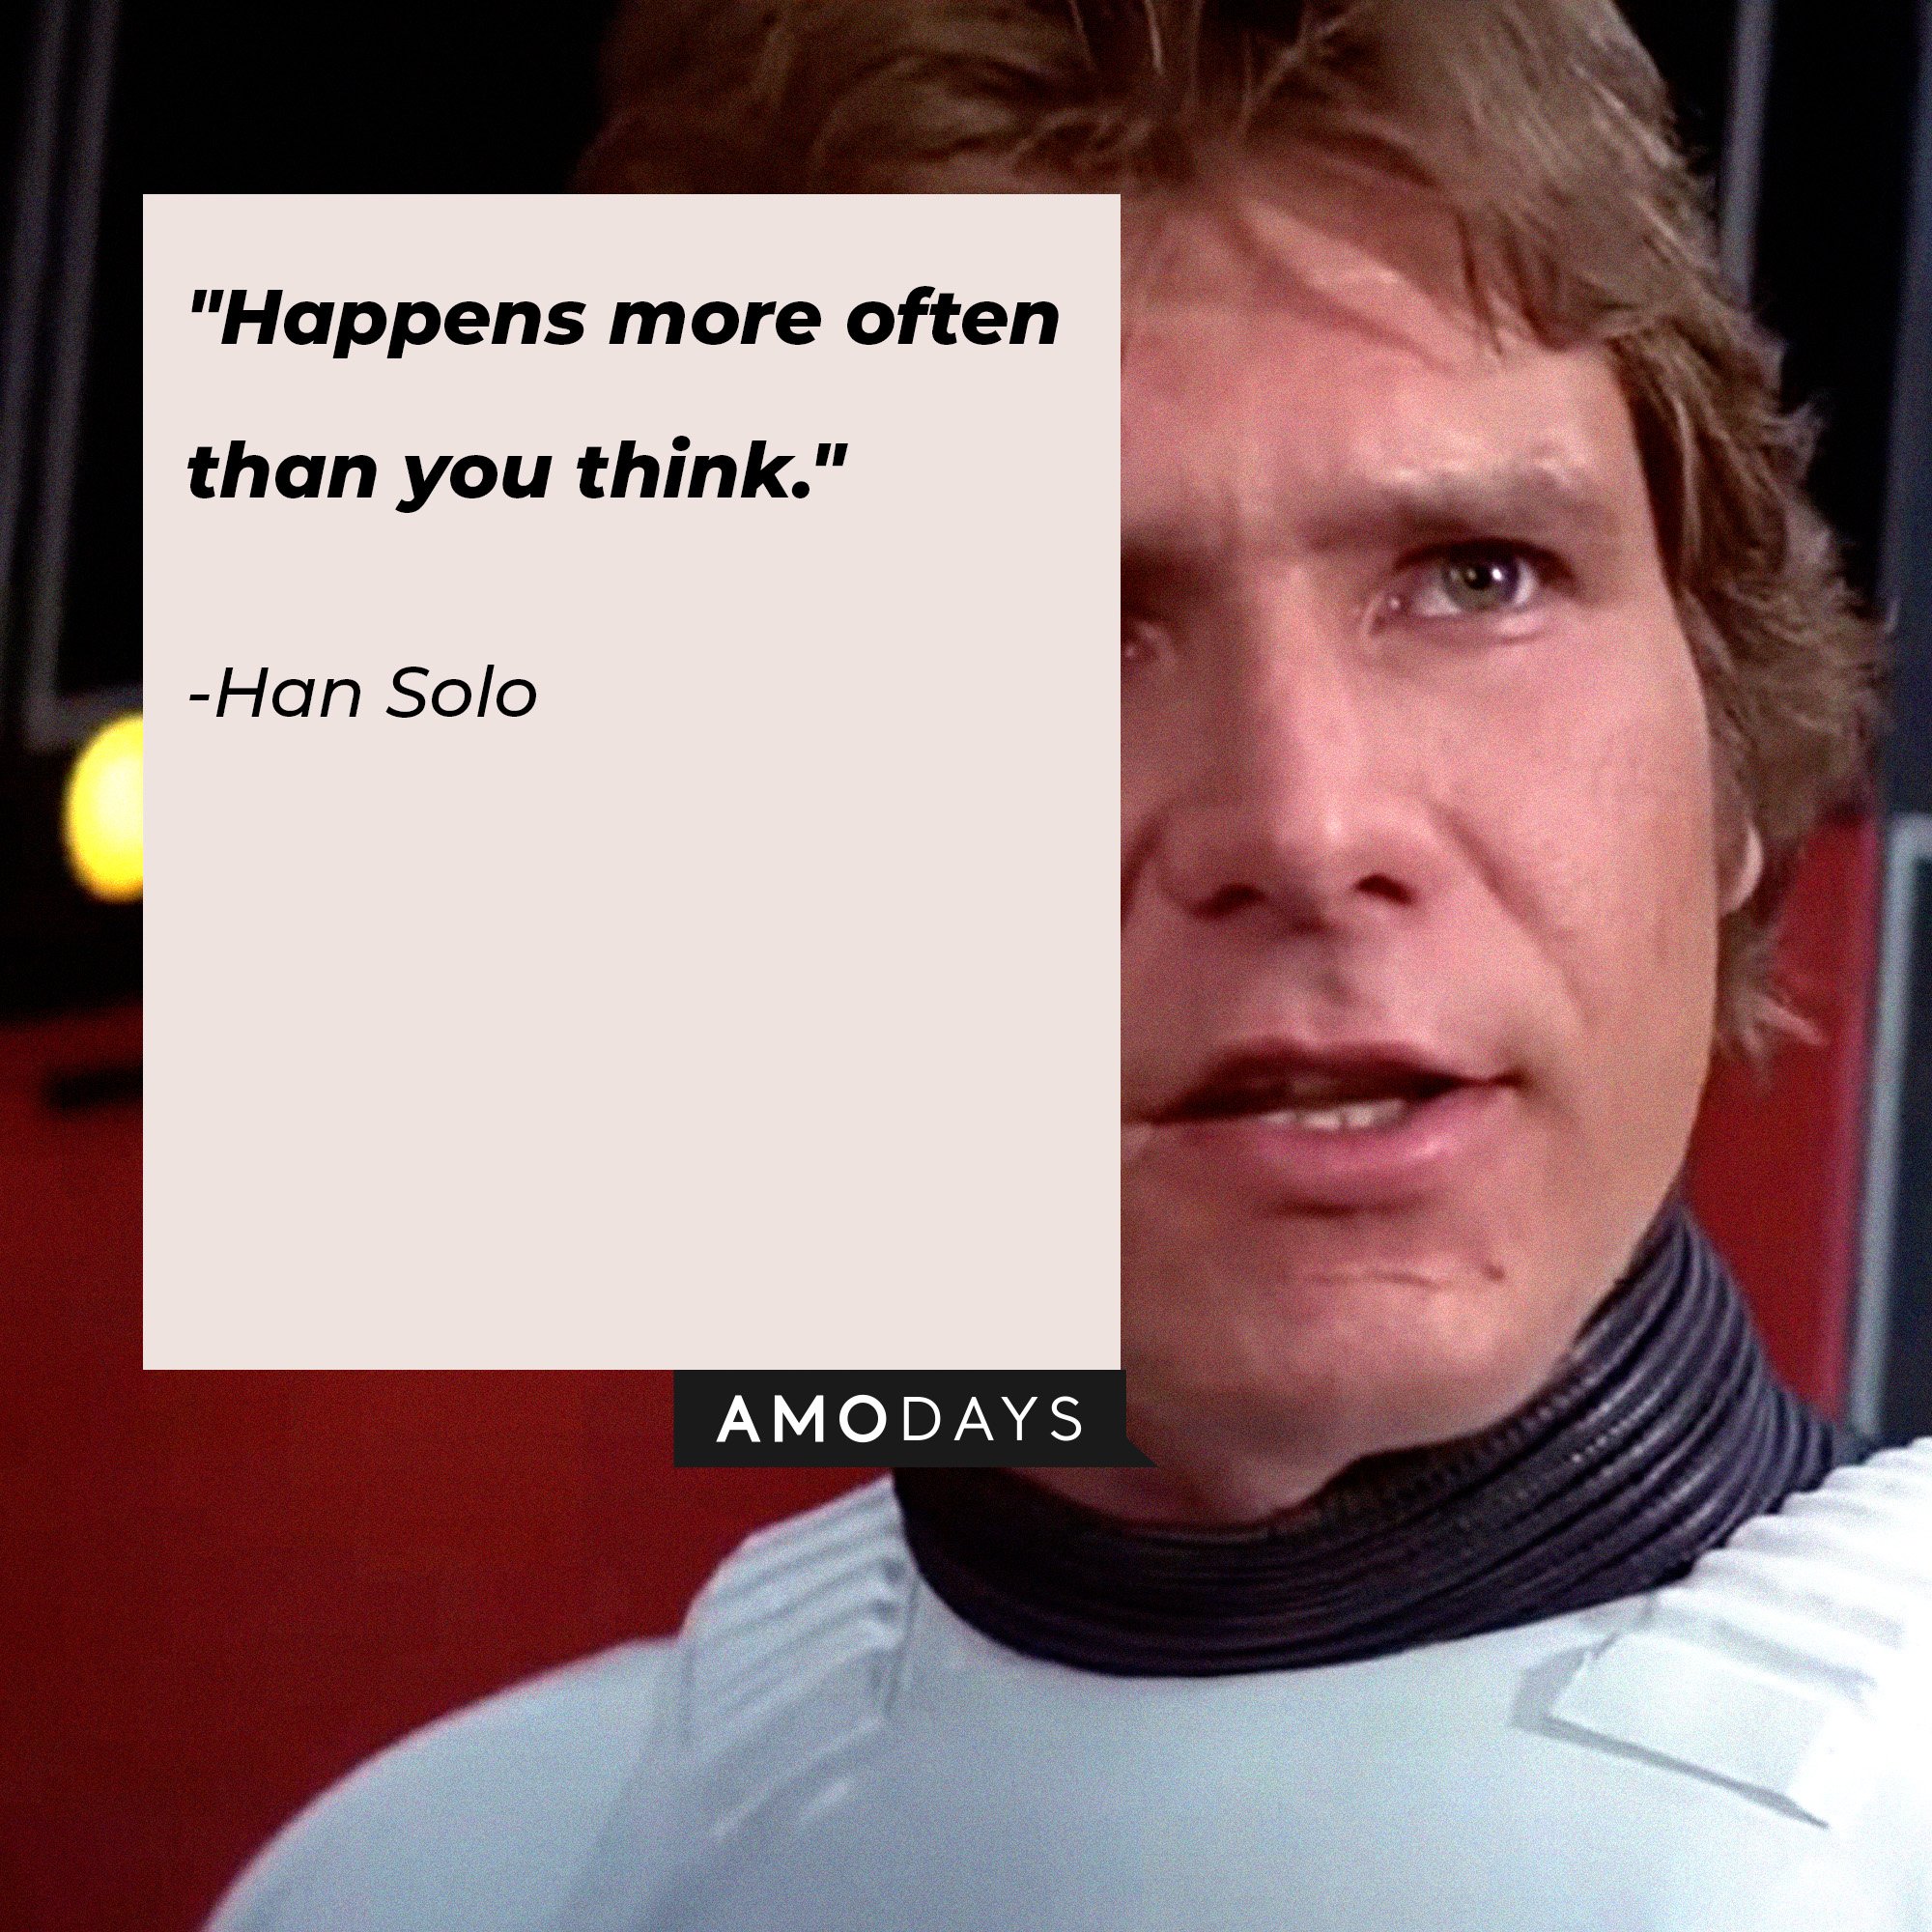 Han Solo’s quote: "Happens more often than you think." | Image: AmoDays